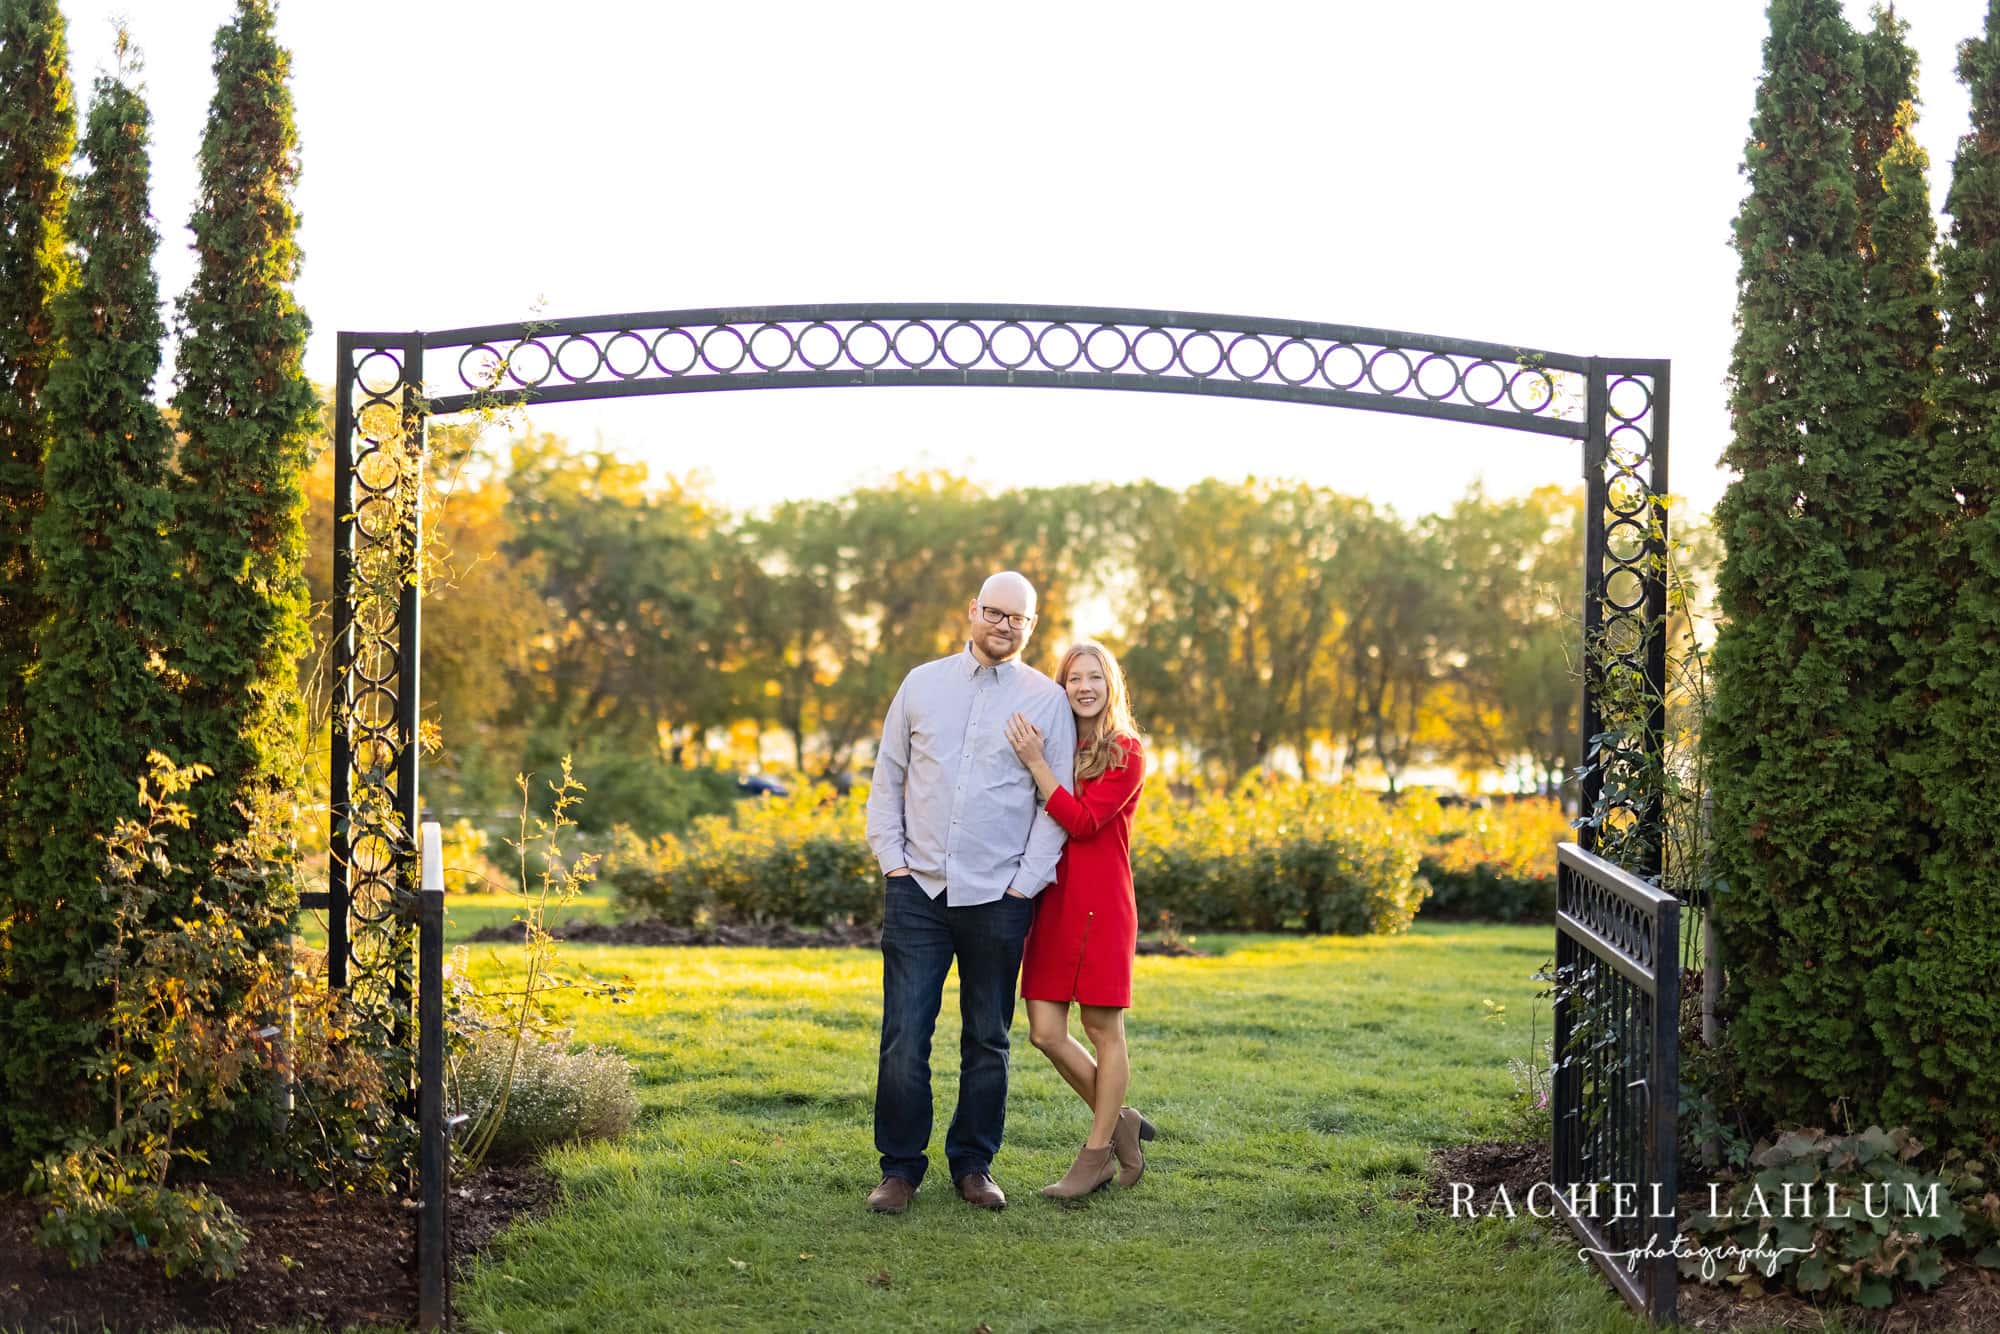 Newly engaged couple pose under a wrought iron archway at Lyndale Rose Gardens.